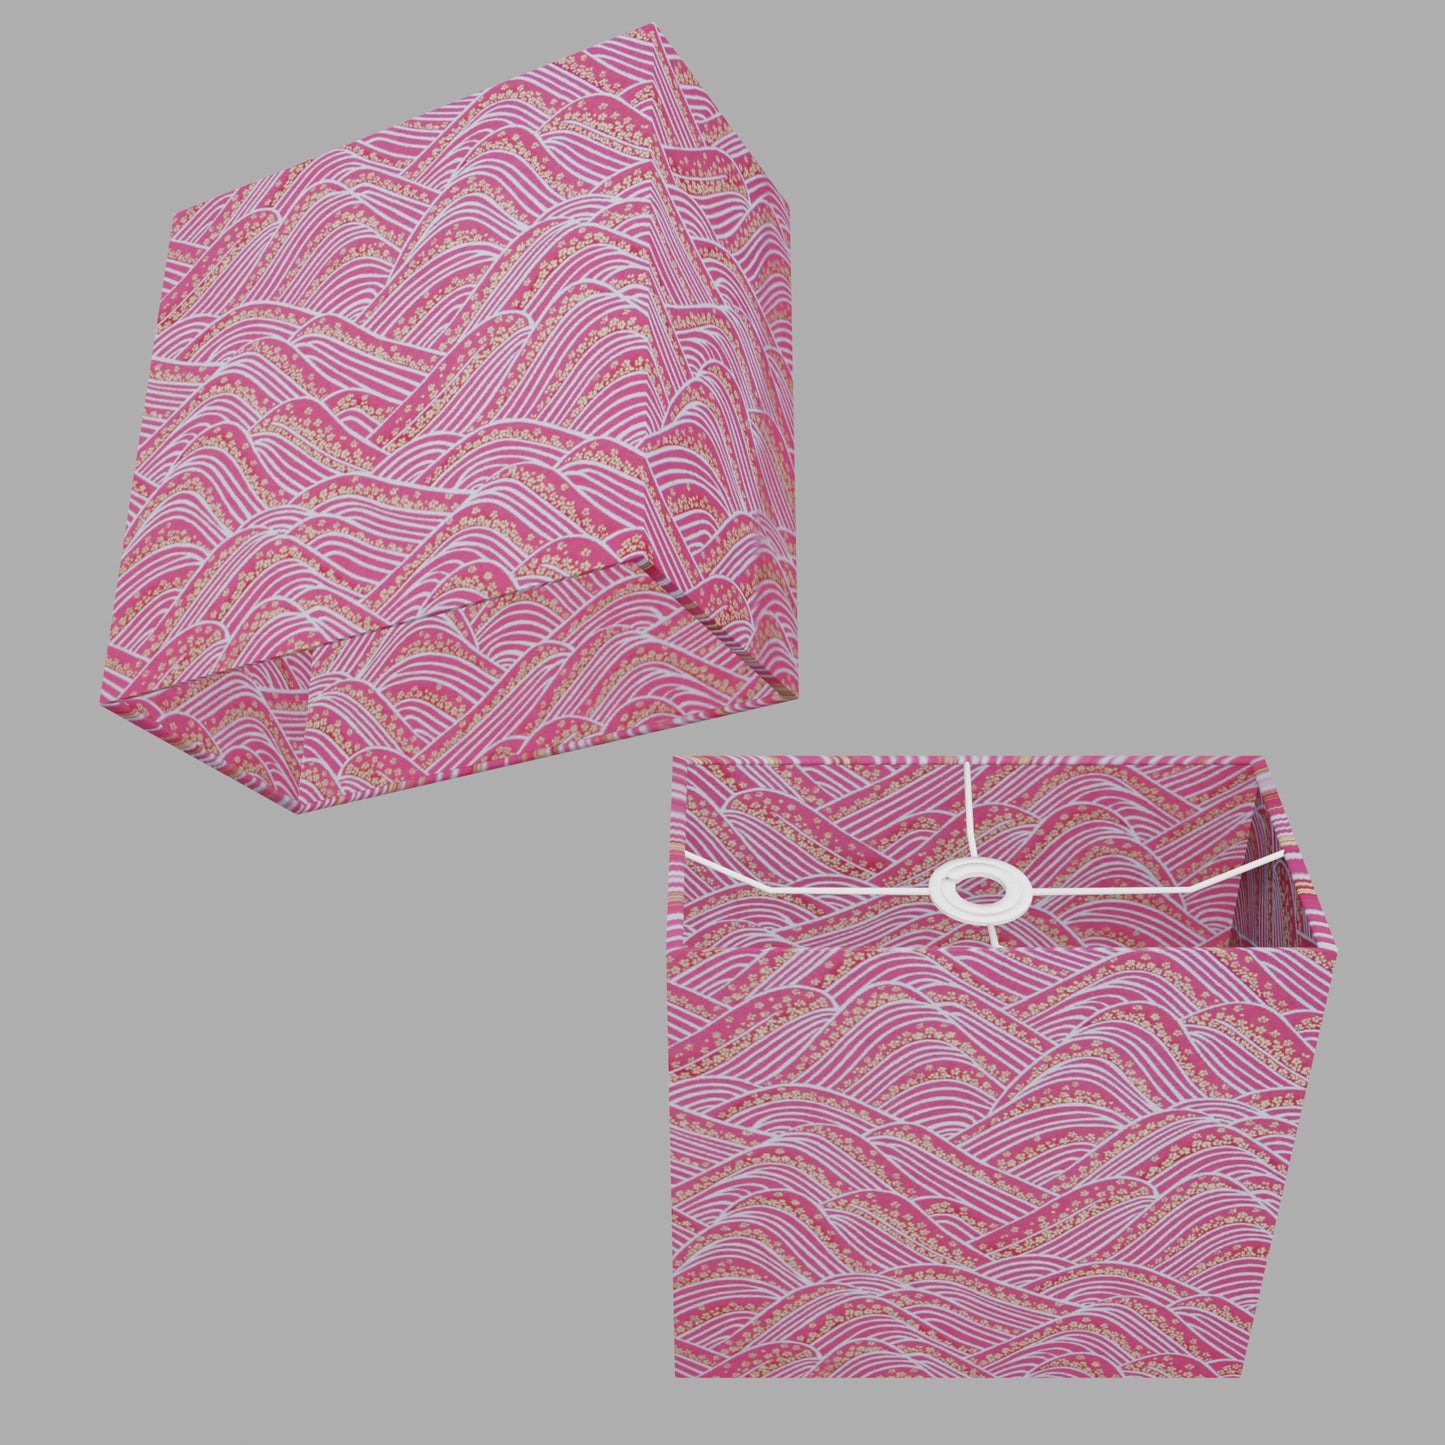 Rectangle Lamp Shade - W04 ~ Pink Hills with Gold Flowers, 30cm(w) x 30cm(h) x 15cm(d)